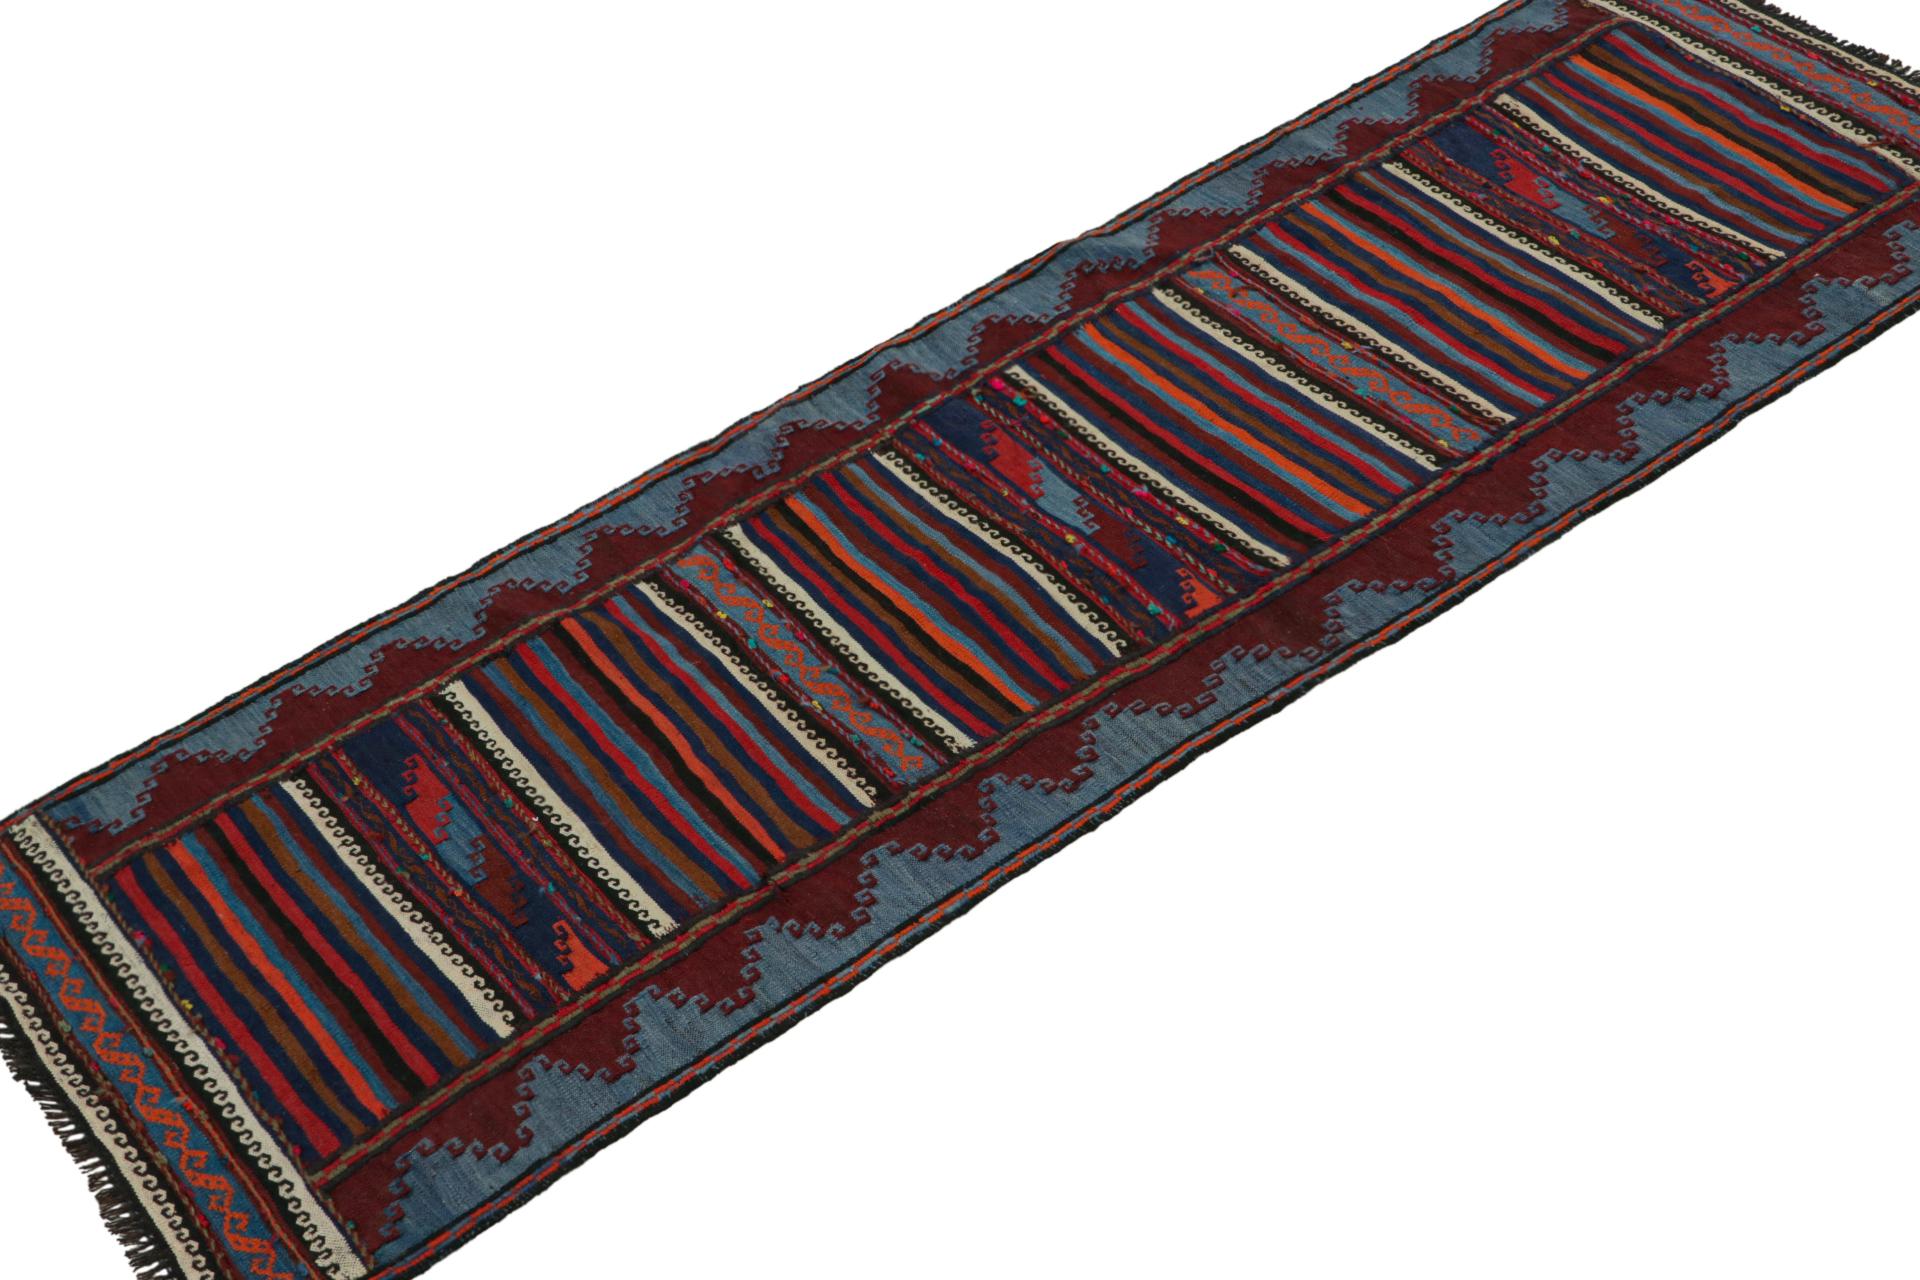 Handwoven in wool, this 2x6 vintage Afghan Baluch tribal kilim runner rug, circa 1950-1960, is an exquisite tribal piece that was often used as table covers in nomadic daily life, much similar to Persian Sofreh Kilims. 

On the Design: 

Tribal